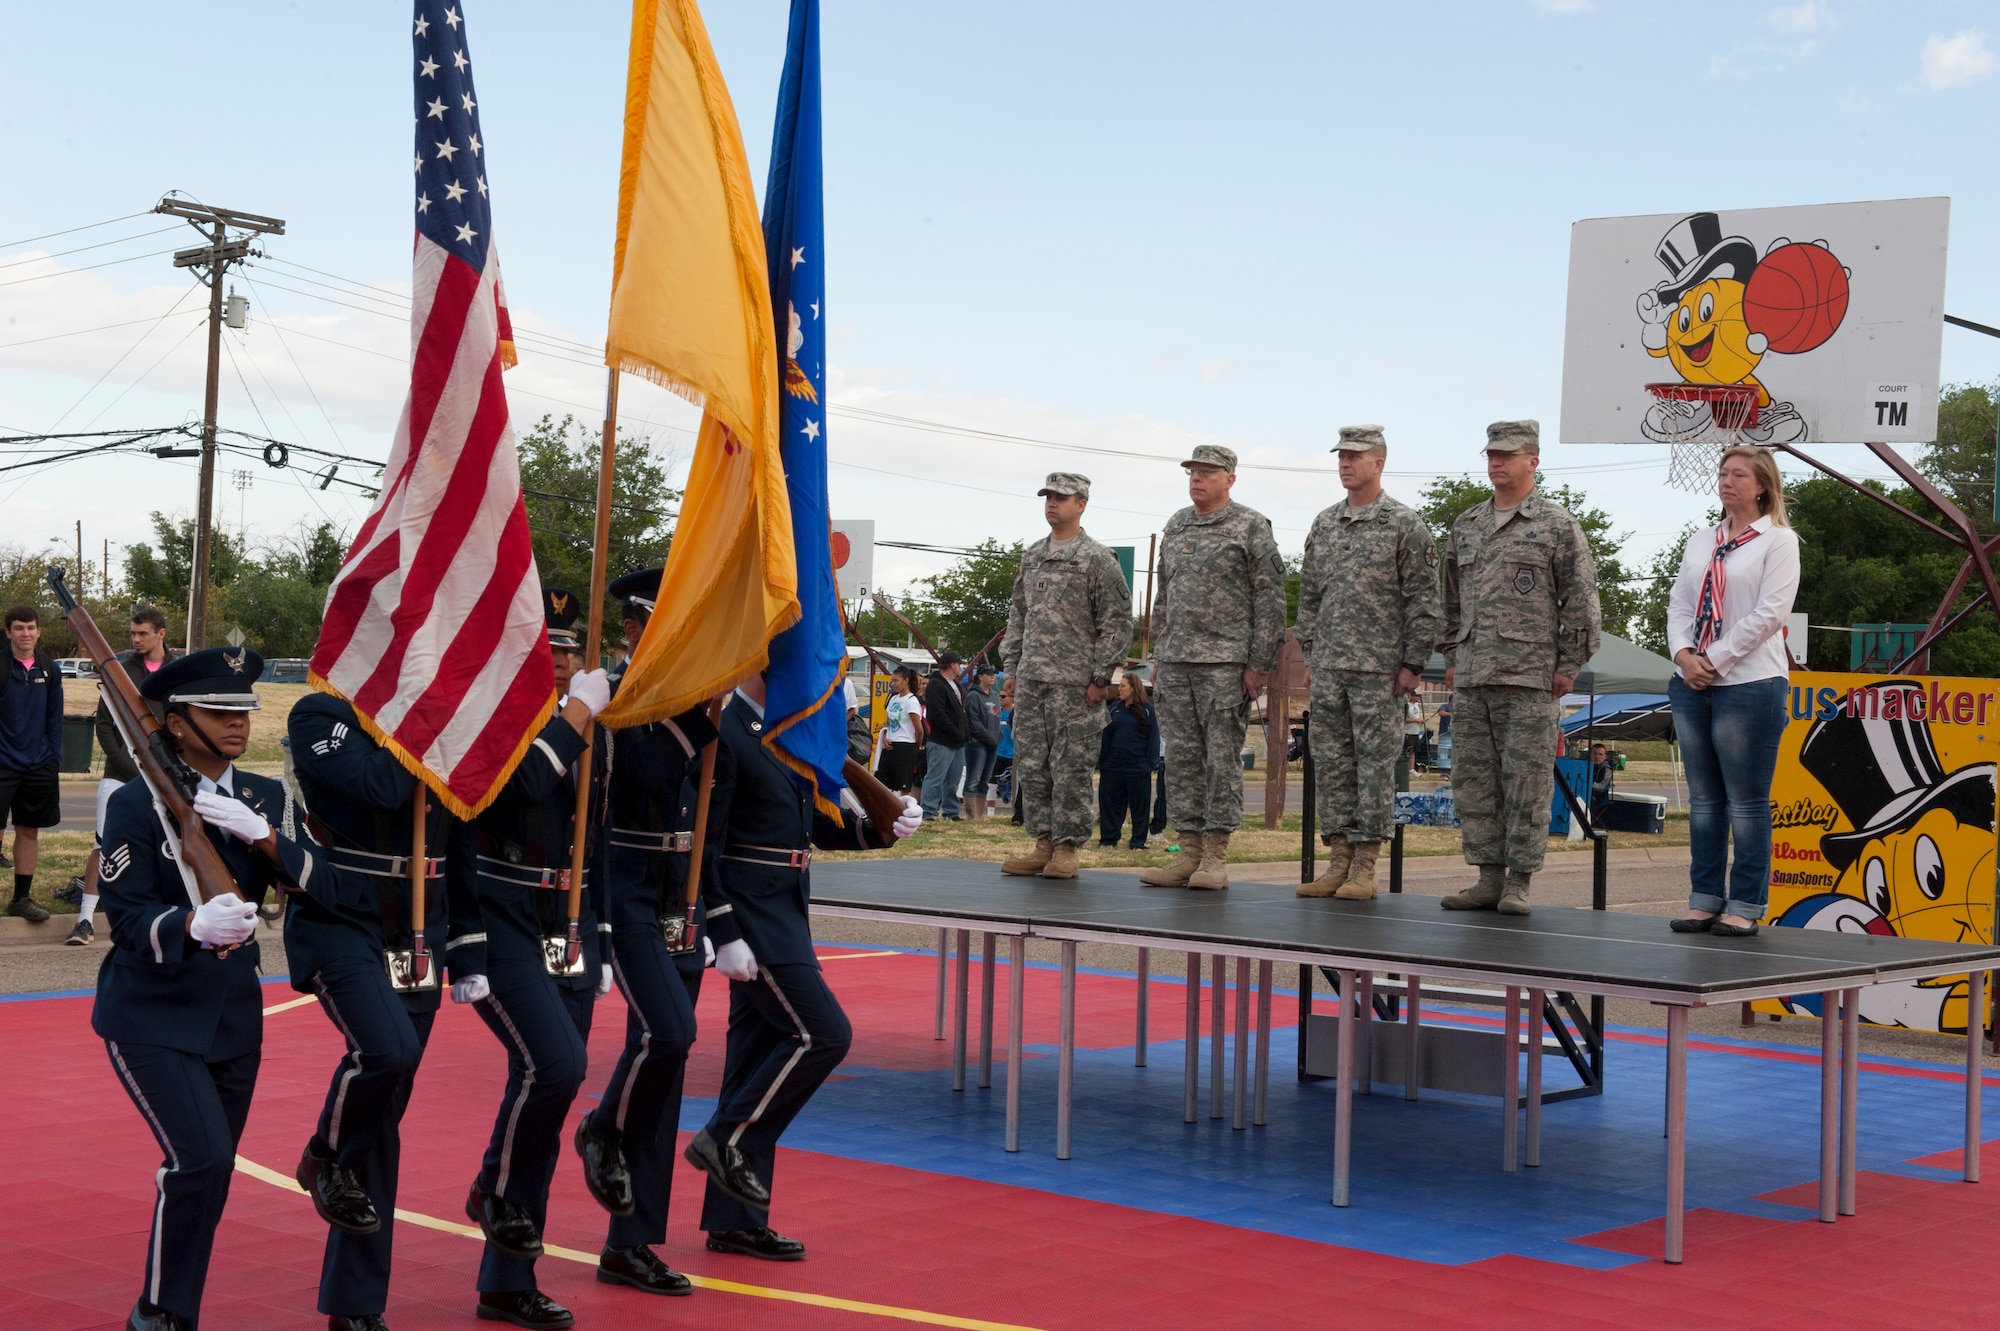 Members of the Steel Talons Honor Guard present the colors to kick off the local Armed Forces Day Celebration at Alamogordo, N.M., May 16, 2015. Created by Secretary of Defense Louis Johnson in 1949, Armed Forces Day is a single-day celebration to pay special tribute to the men and women of the Armed Forces. (U.S. Air Force photo by Capt. Bryant Davis/Released)